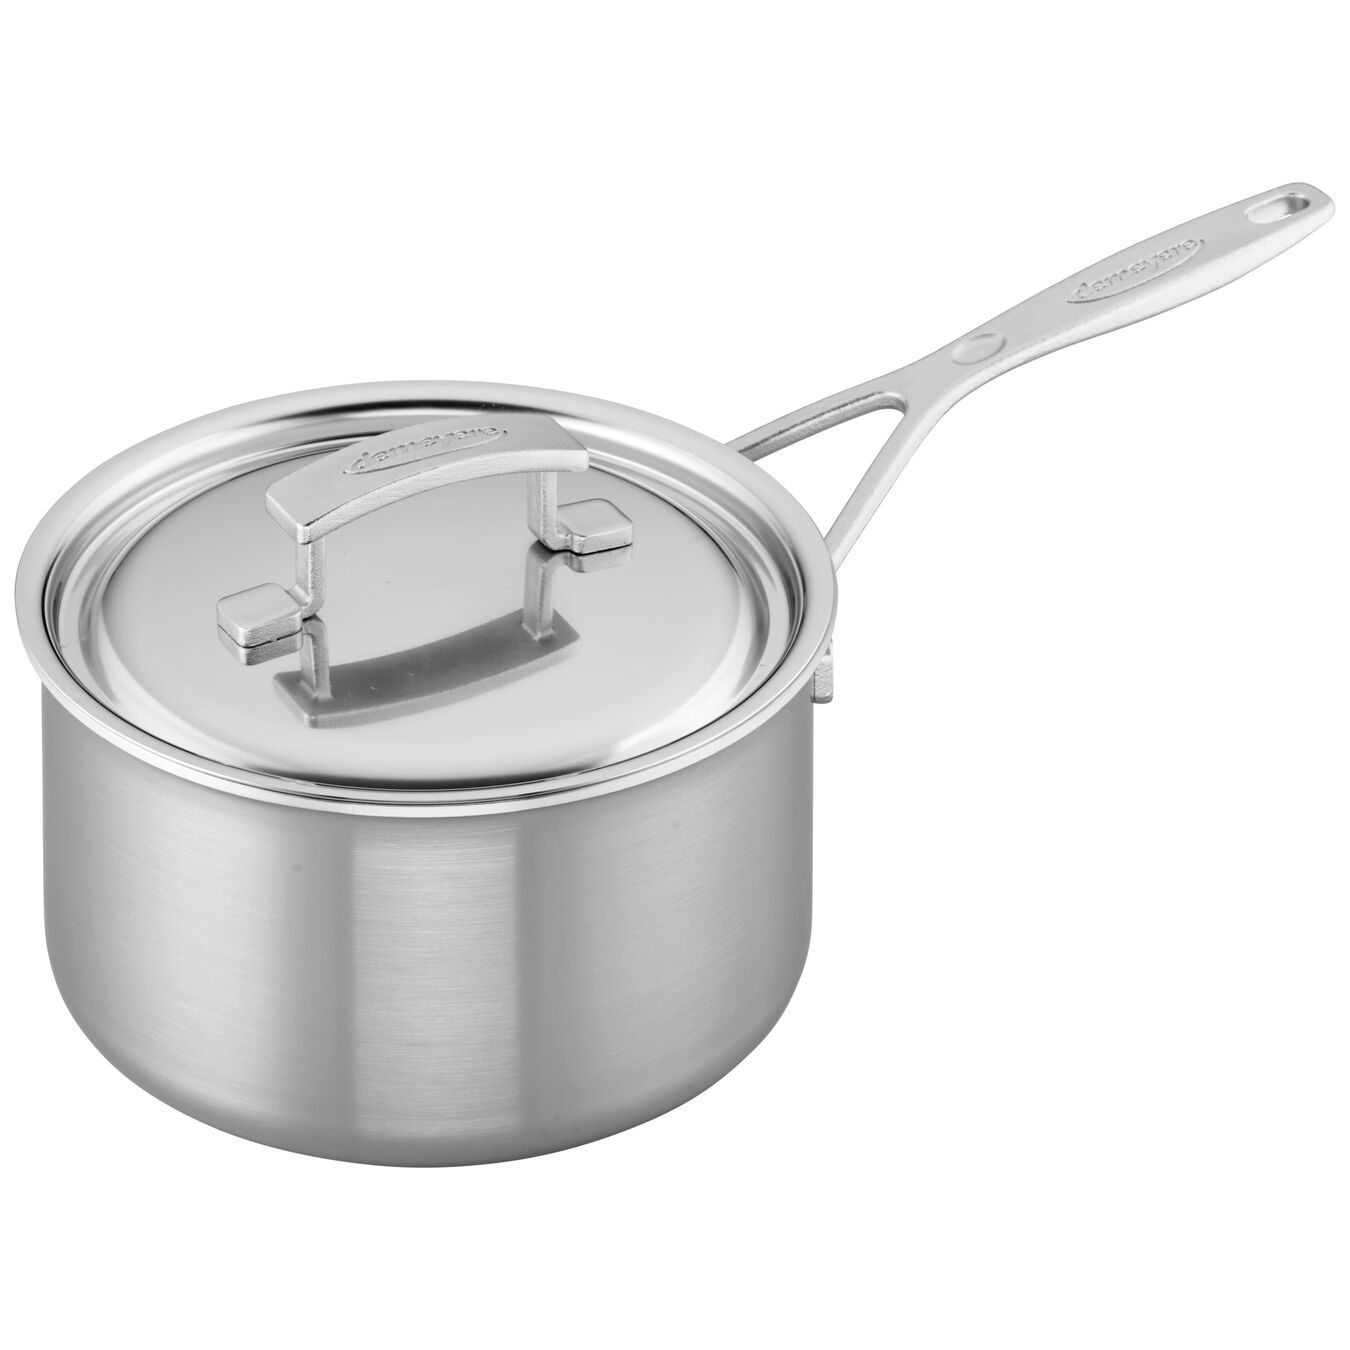 Demeyere Industry 5-Ply 3-qt Stainless Steel Saucepan | Official Demeyere Industry 5 Ply 3 Qt Stainless Steel Saute Pan